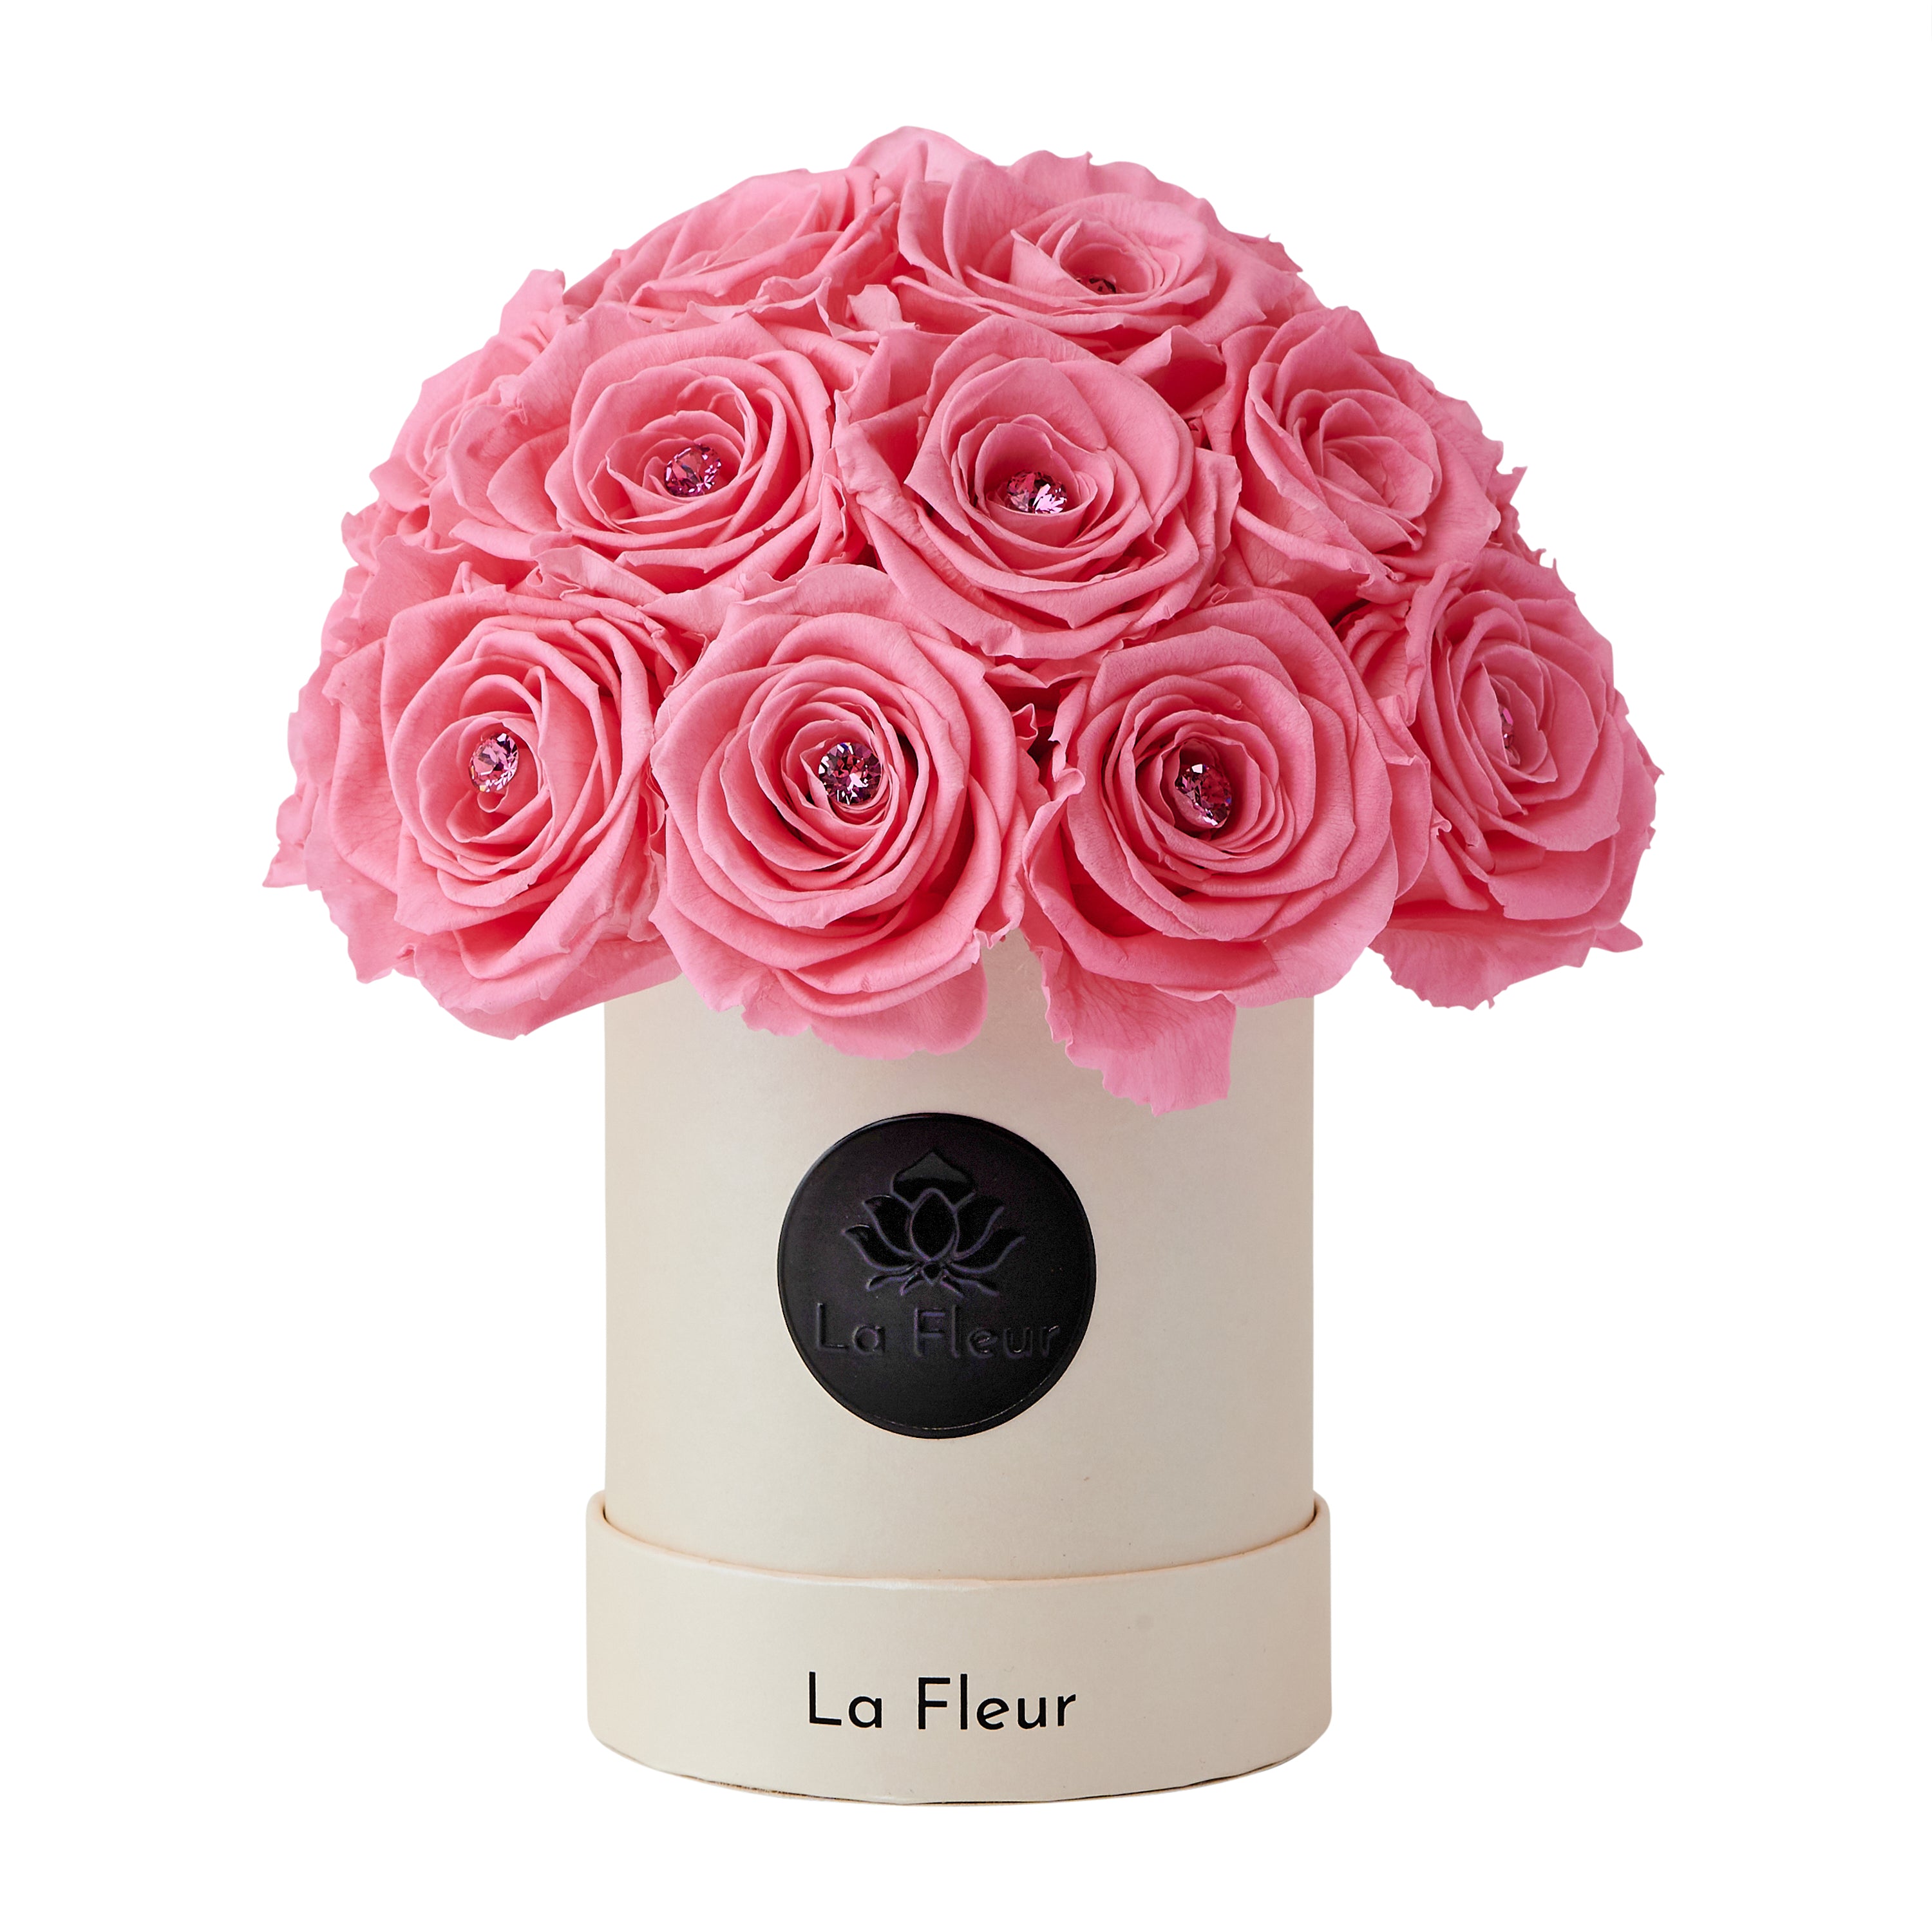 Classic Real Touch Pink English Rose Arrangement – Flovery